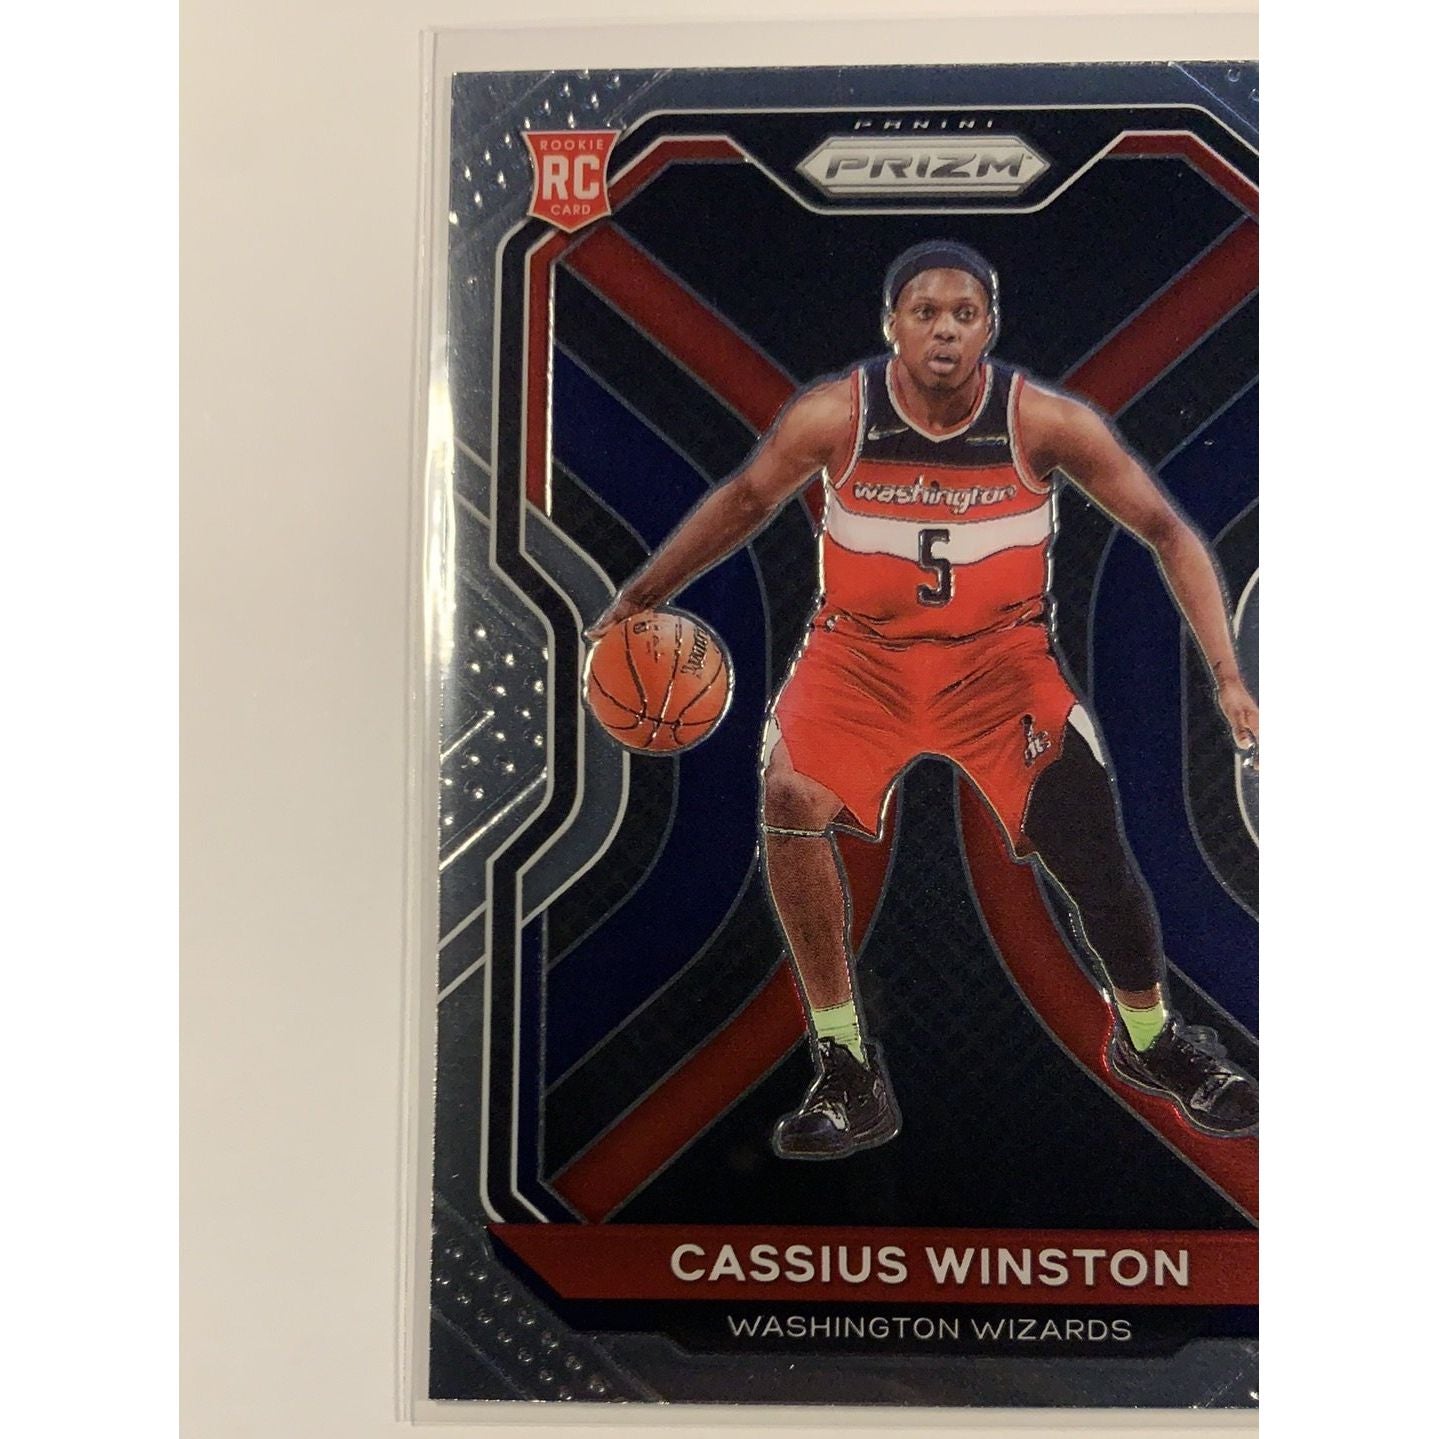  2020-21 Panini Prizm Cassius Winston Rookie Card  Local Legends Cards & Collectibles